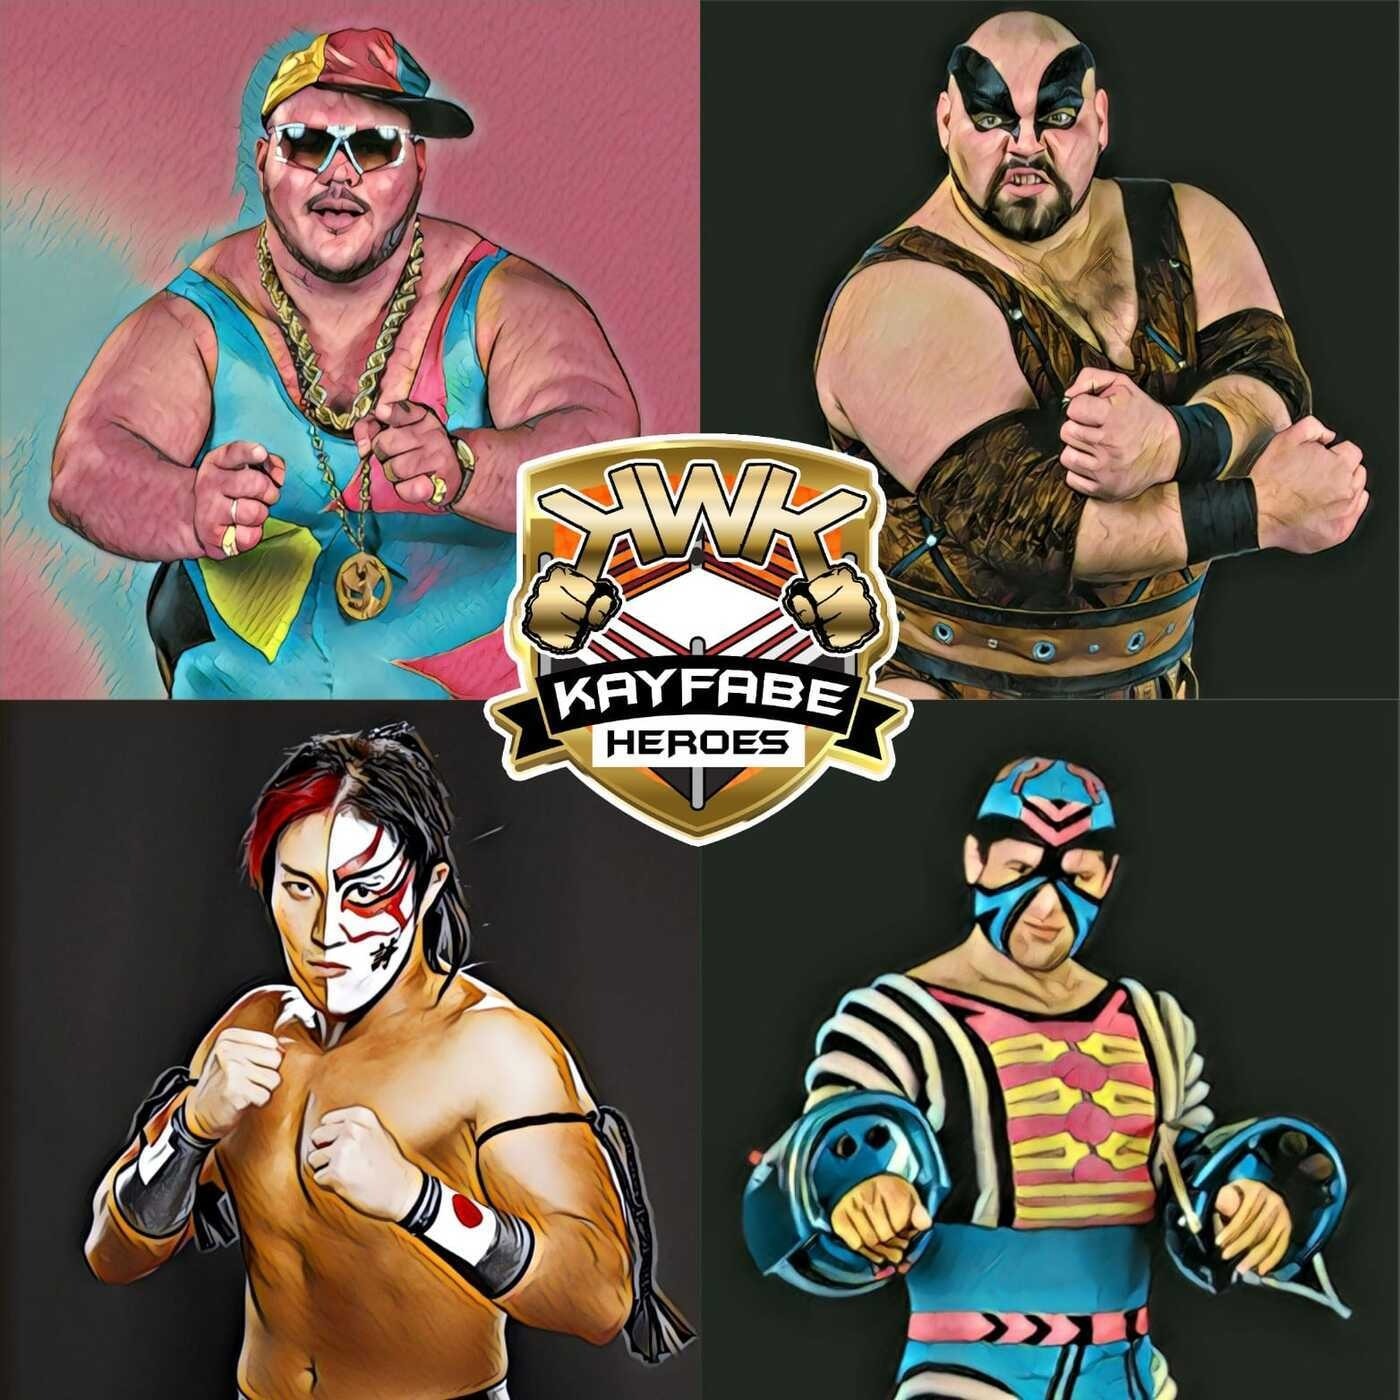 E141 : Interview with Shawn Ng Discussing KWK Kayfabe Heroes Series One